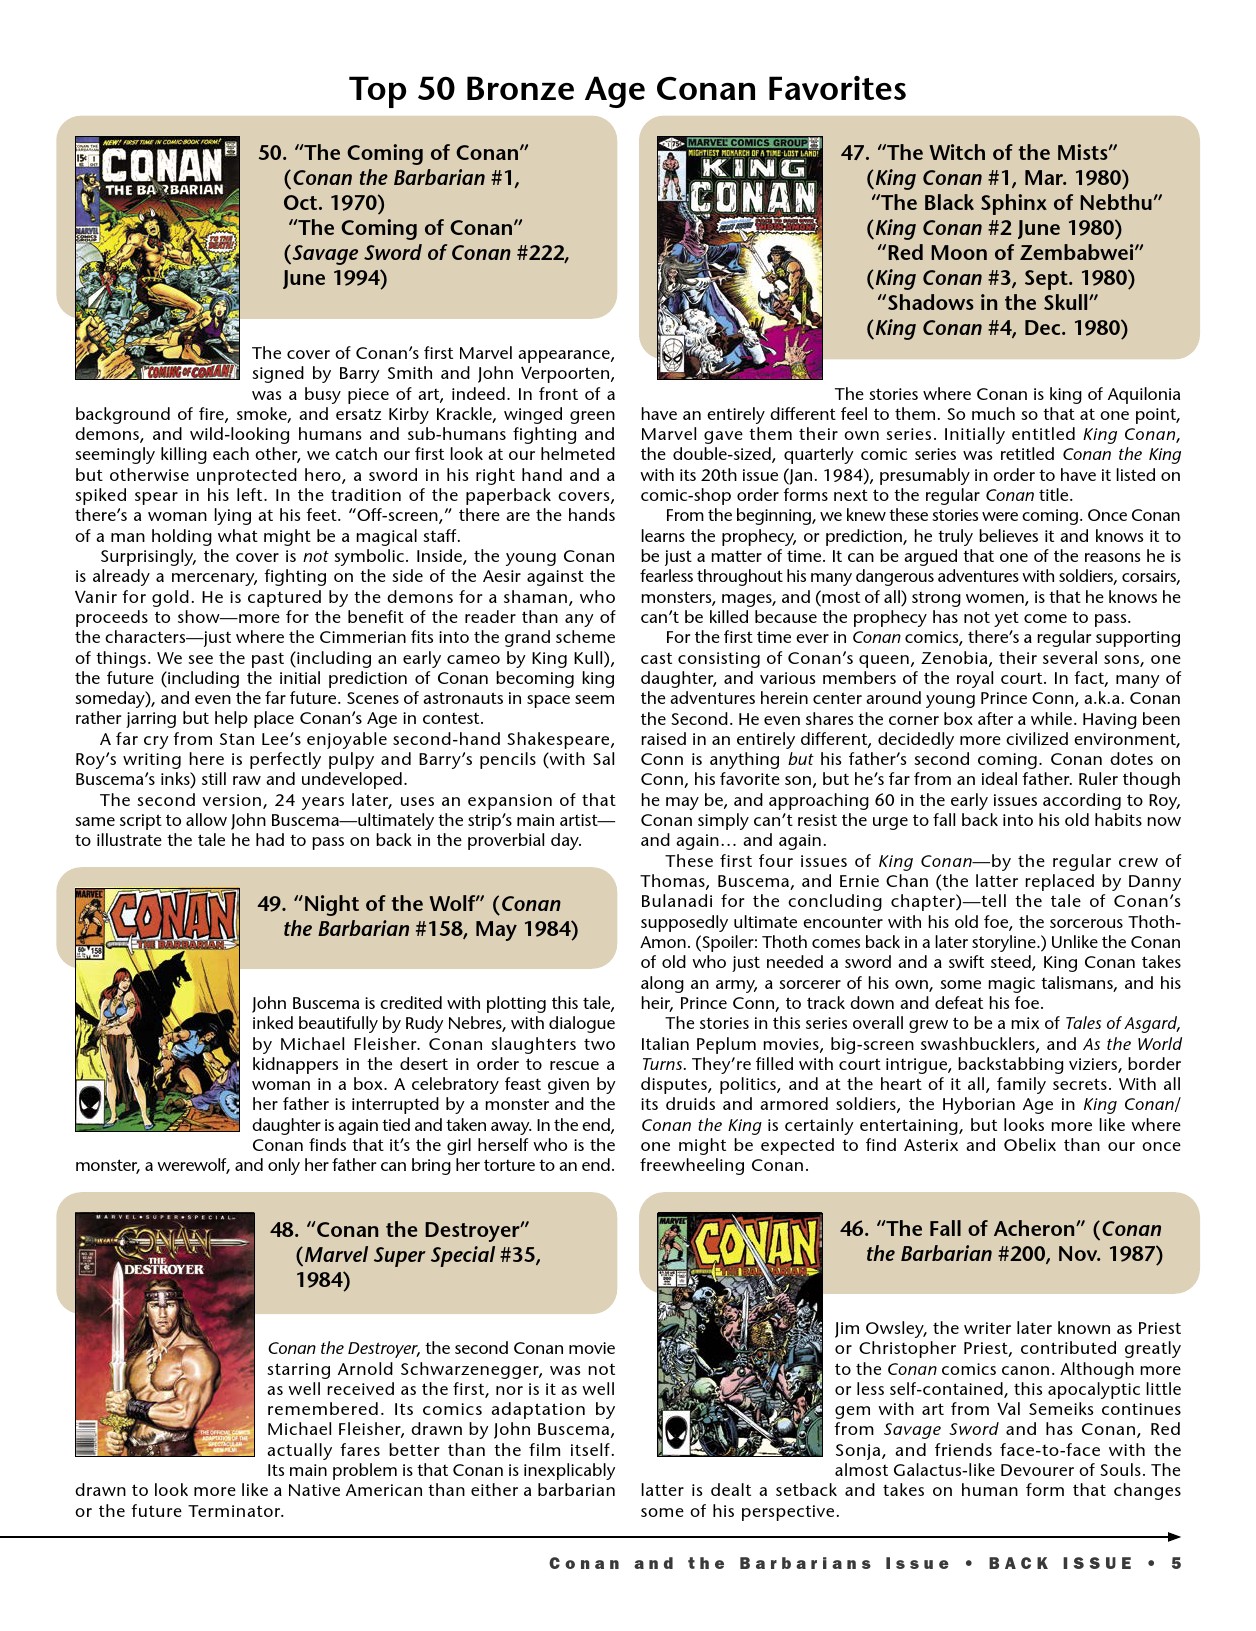 Read online Back Issue comic -  Issue #121 - 7